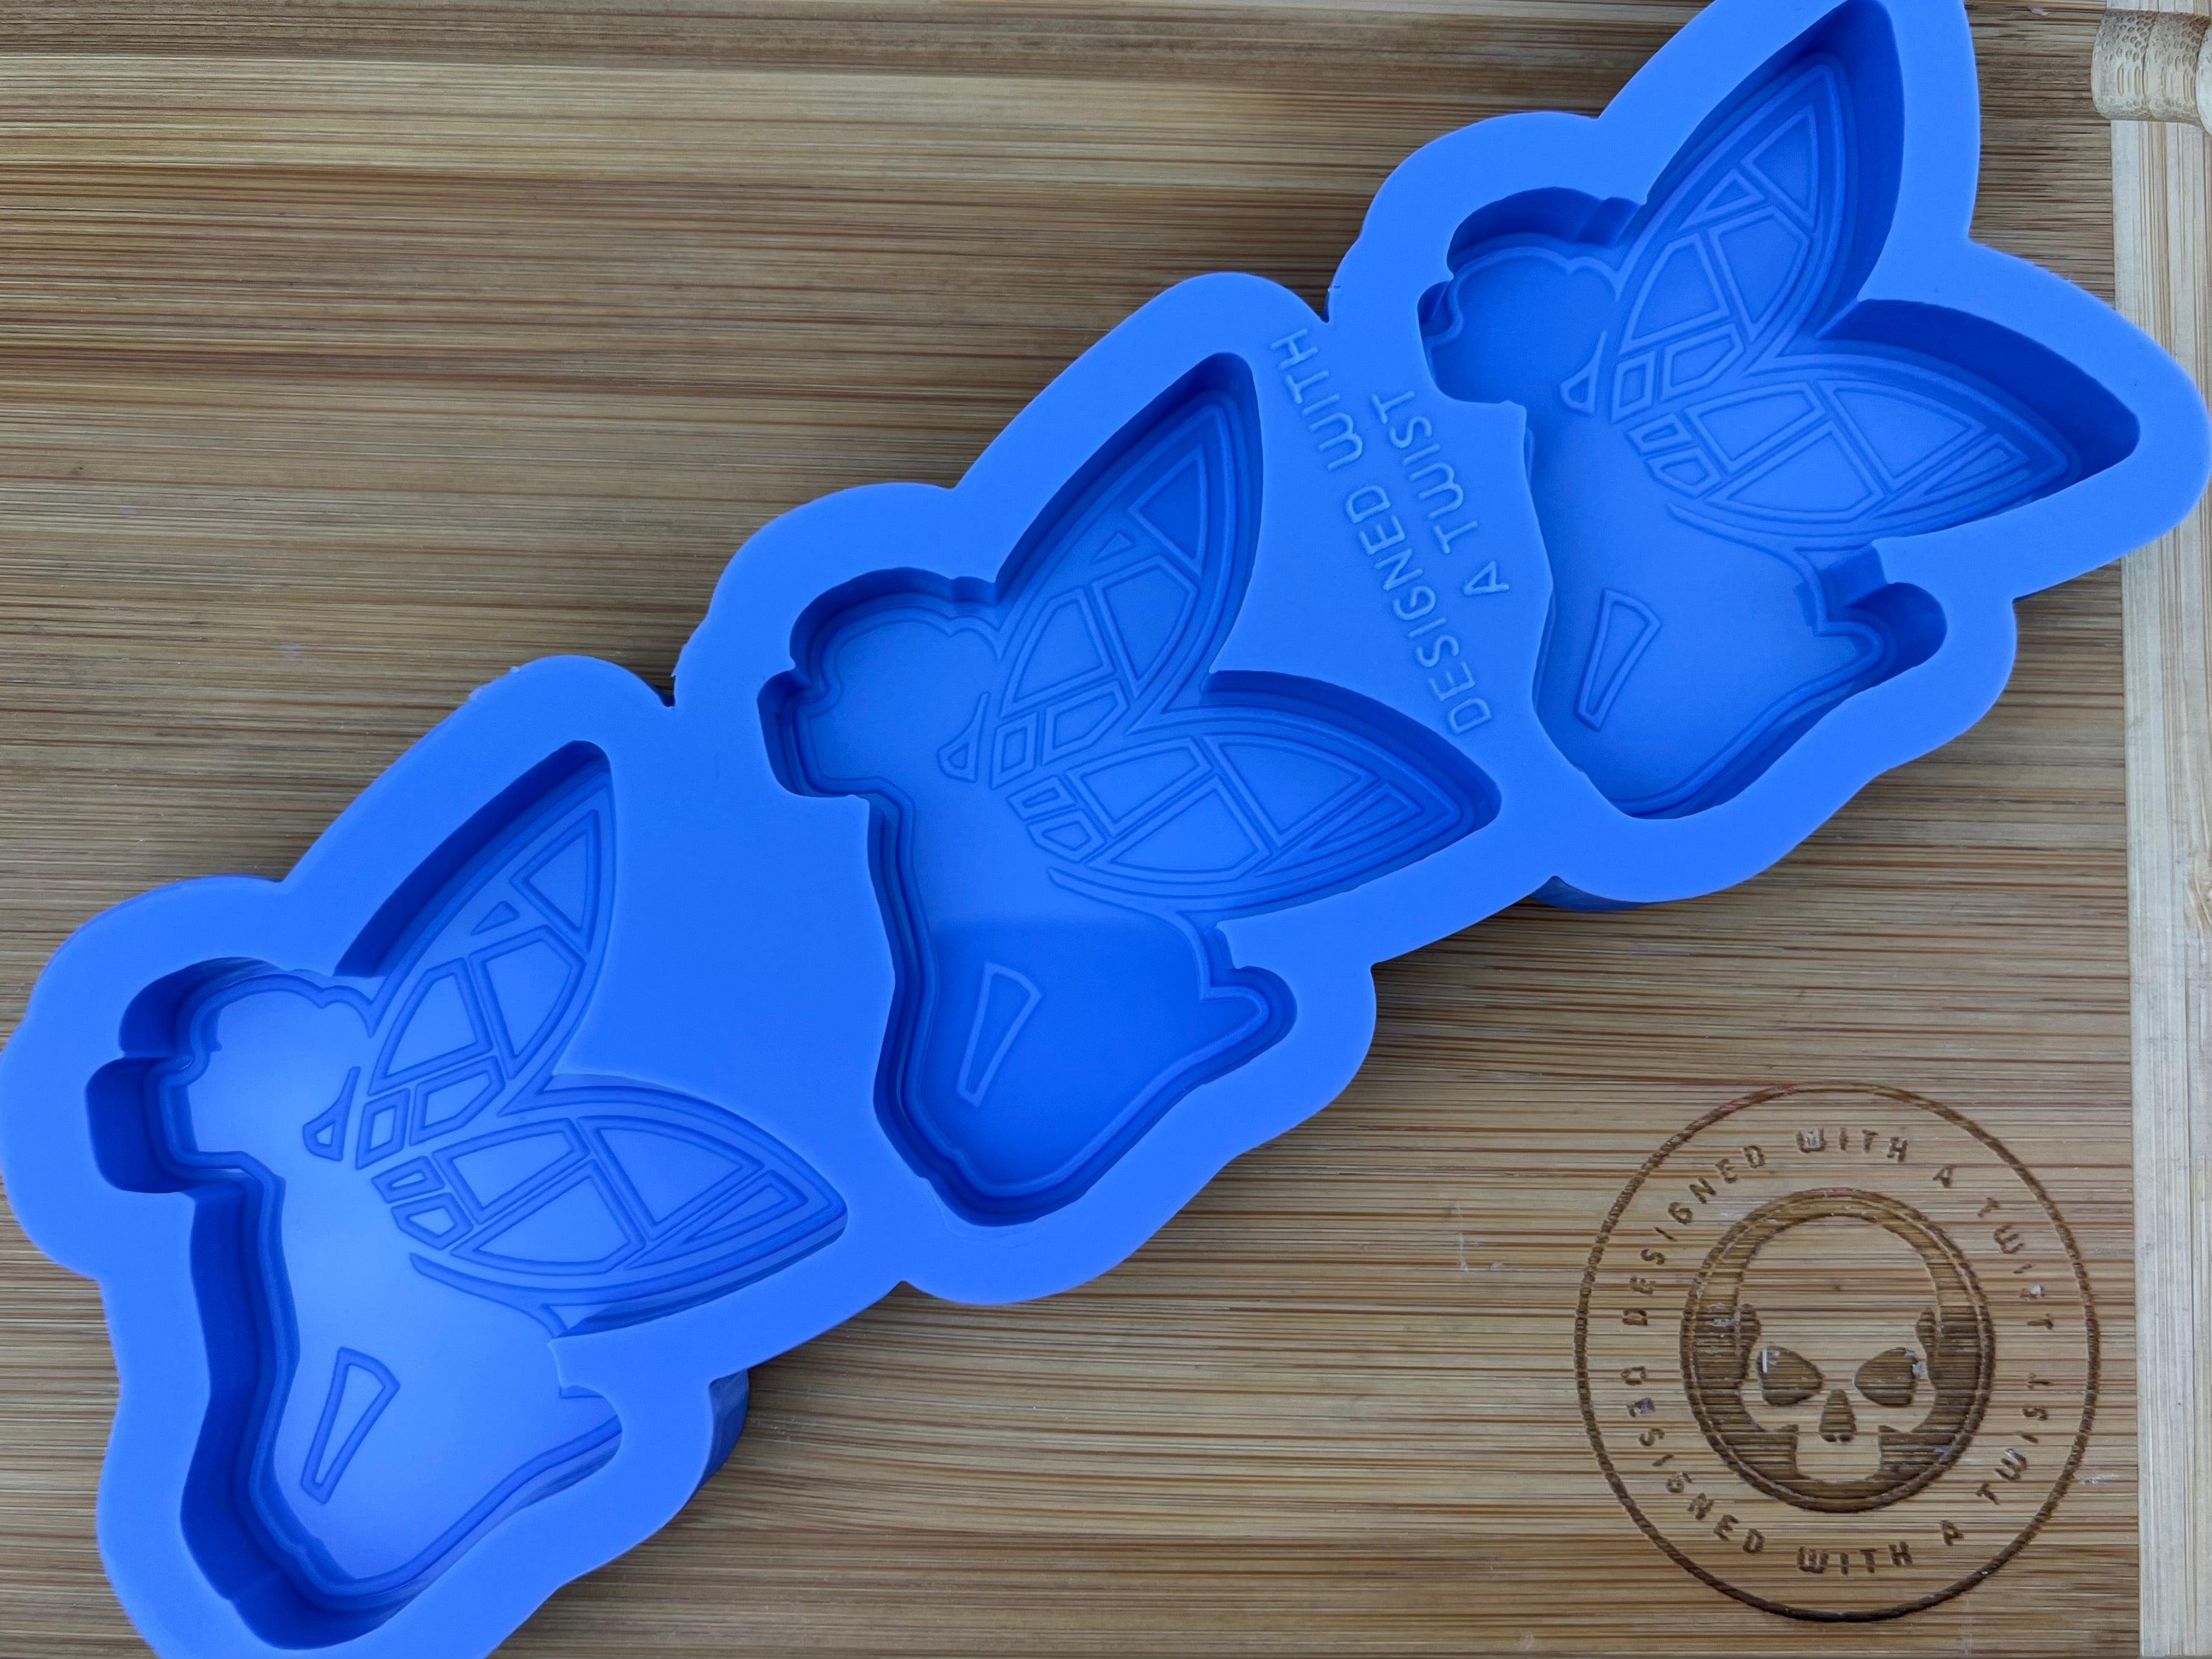 Fairy Wax Melt Silicone Mold - Designed with a Twist - Top quality silicone molds made in the UK.